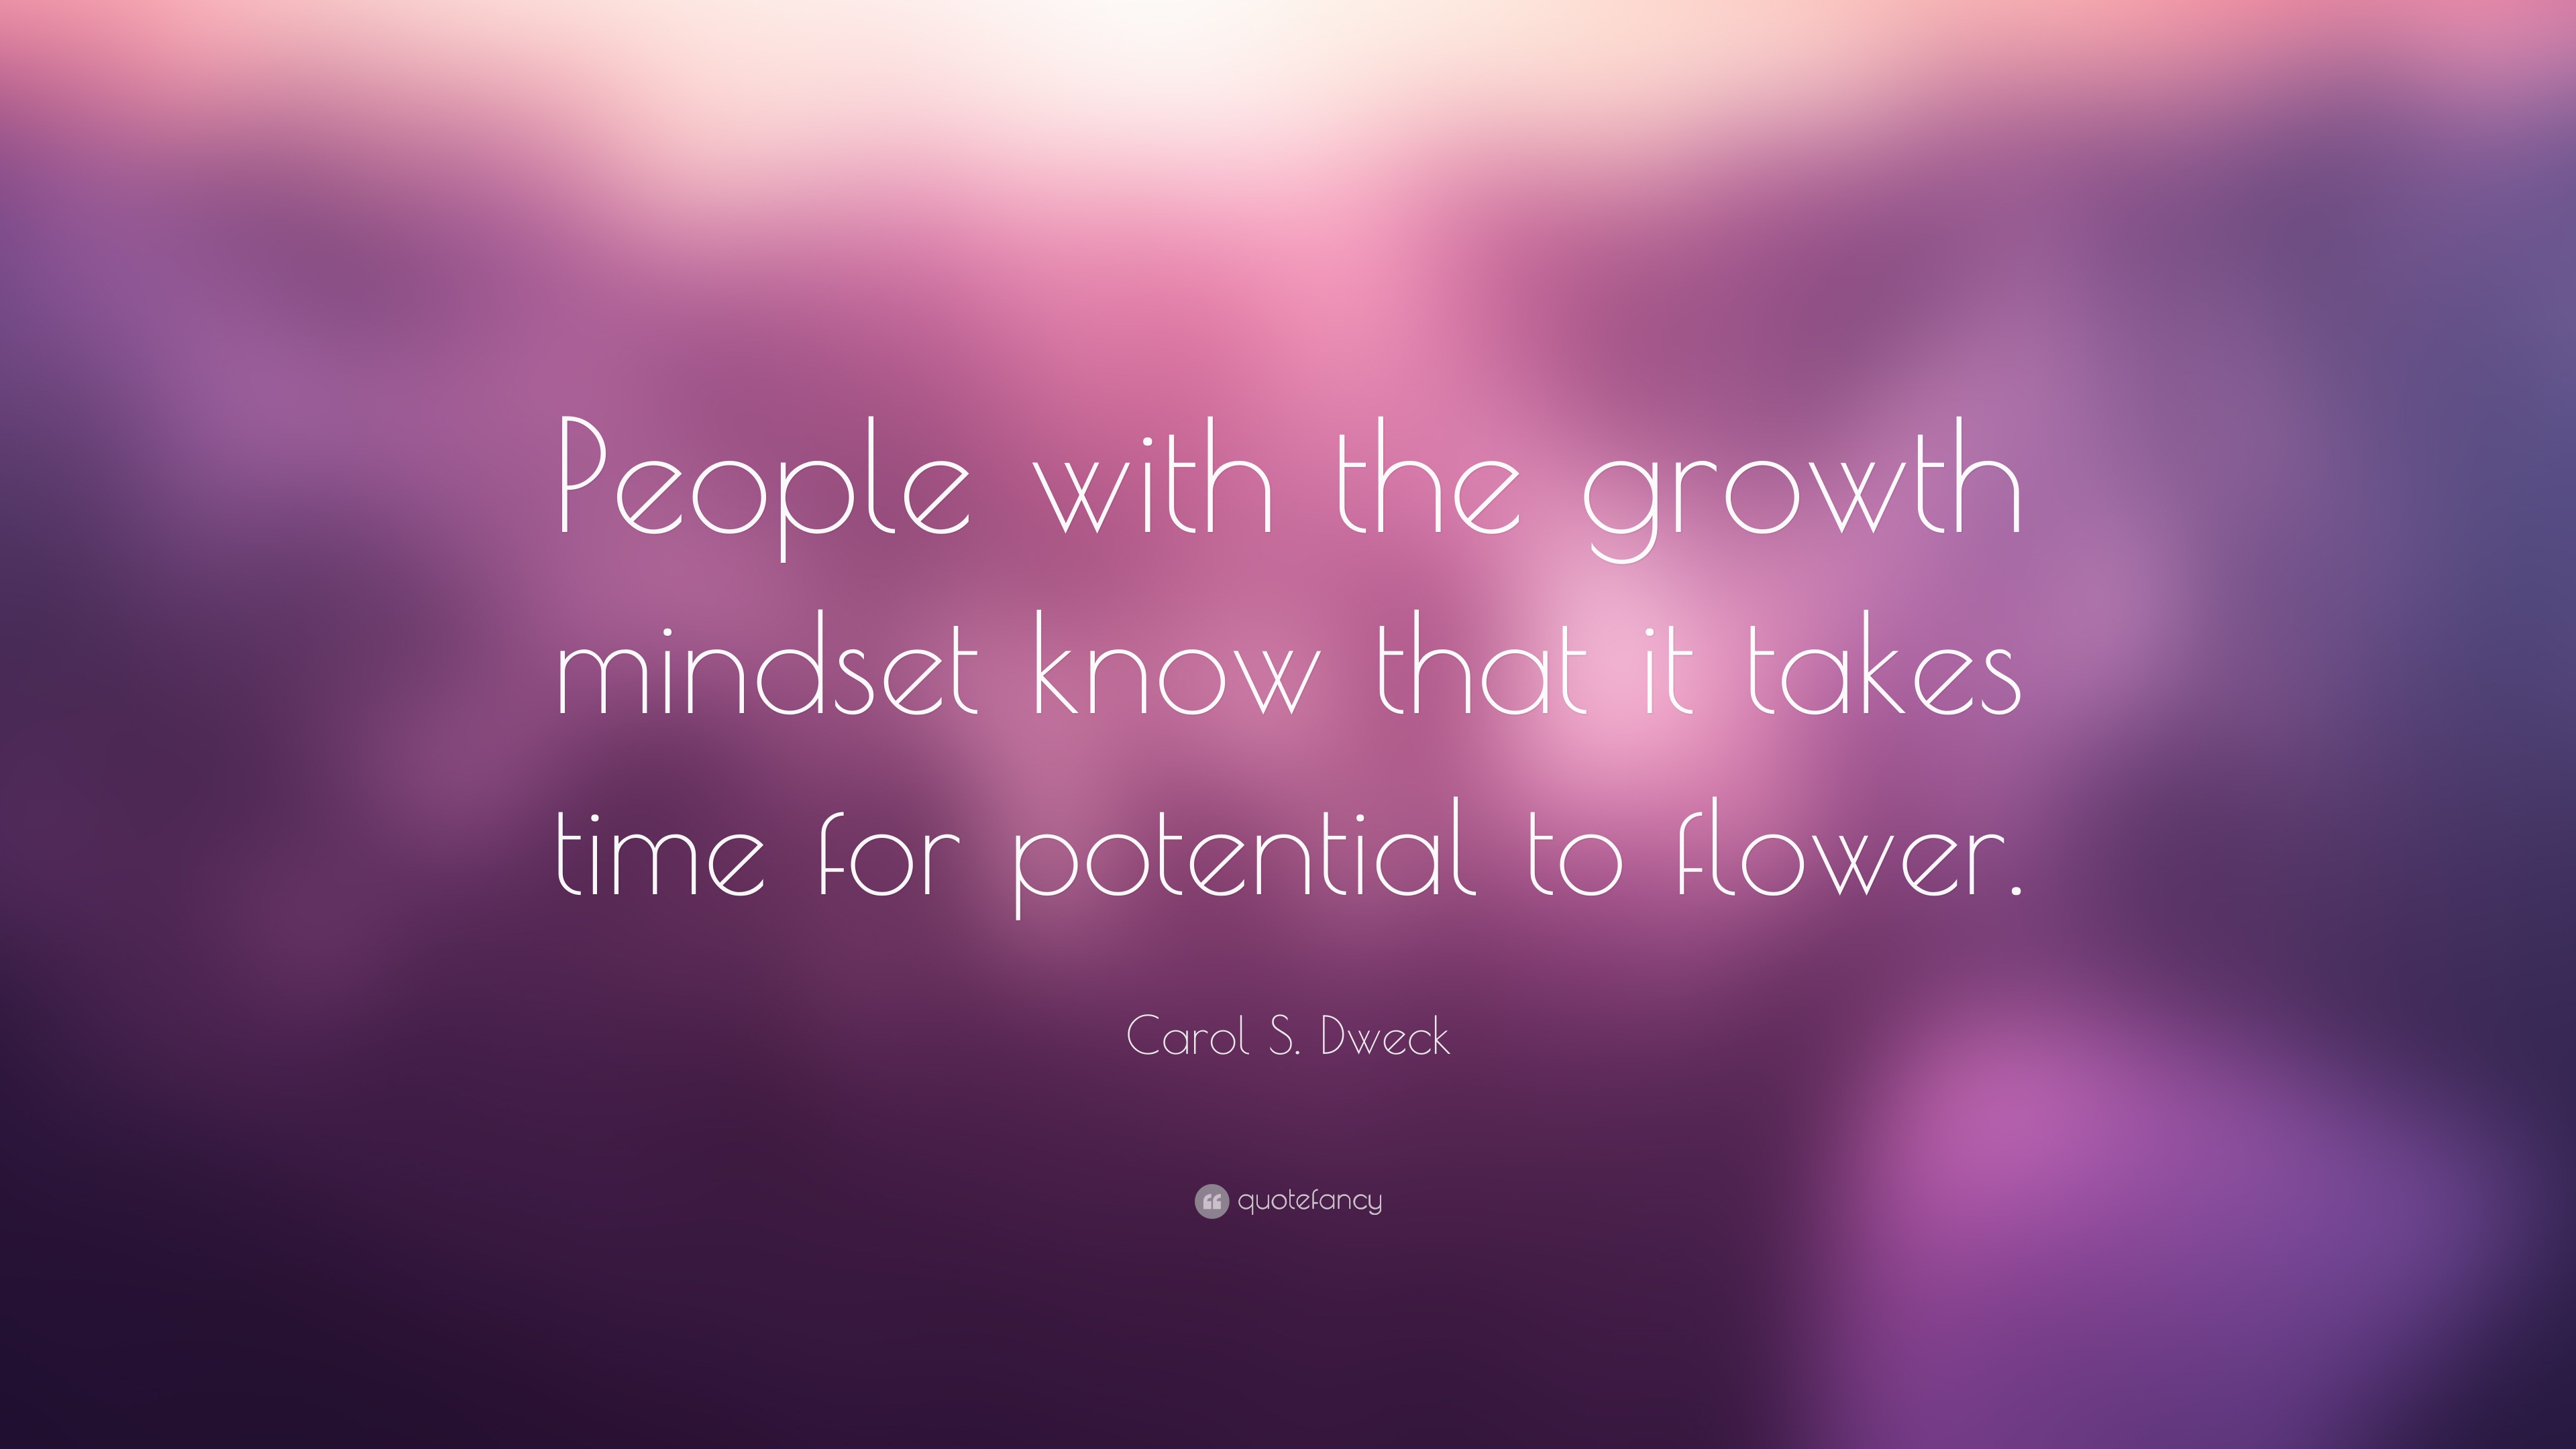 Carol Dweck Quotes To Inspire A Growth Mindset - The Joy Within